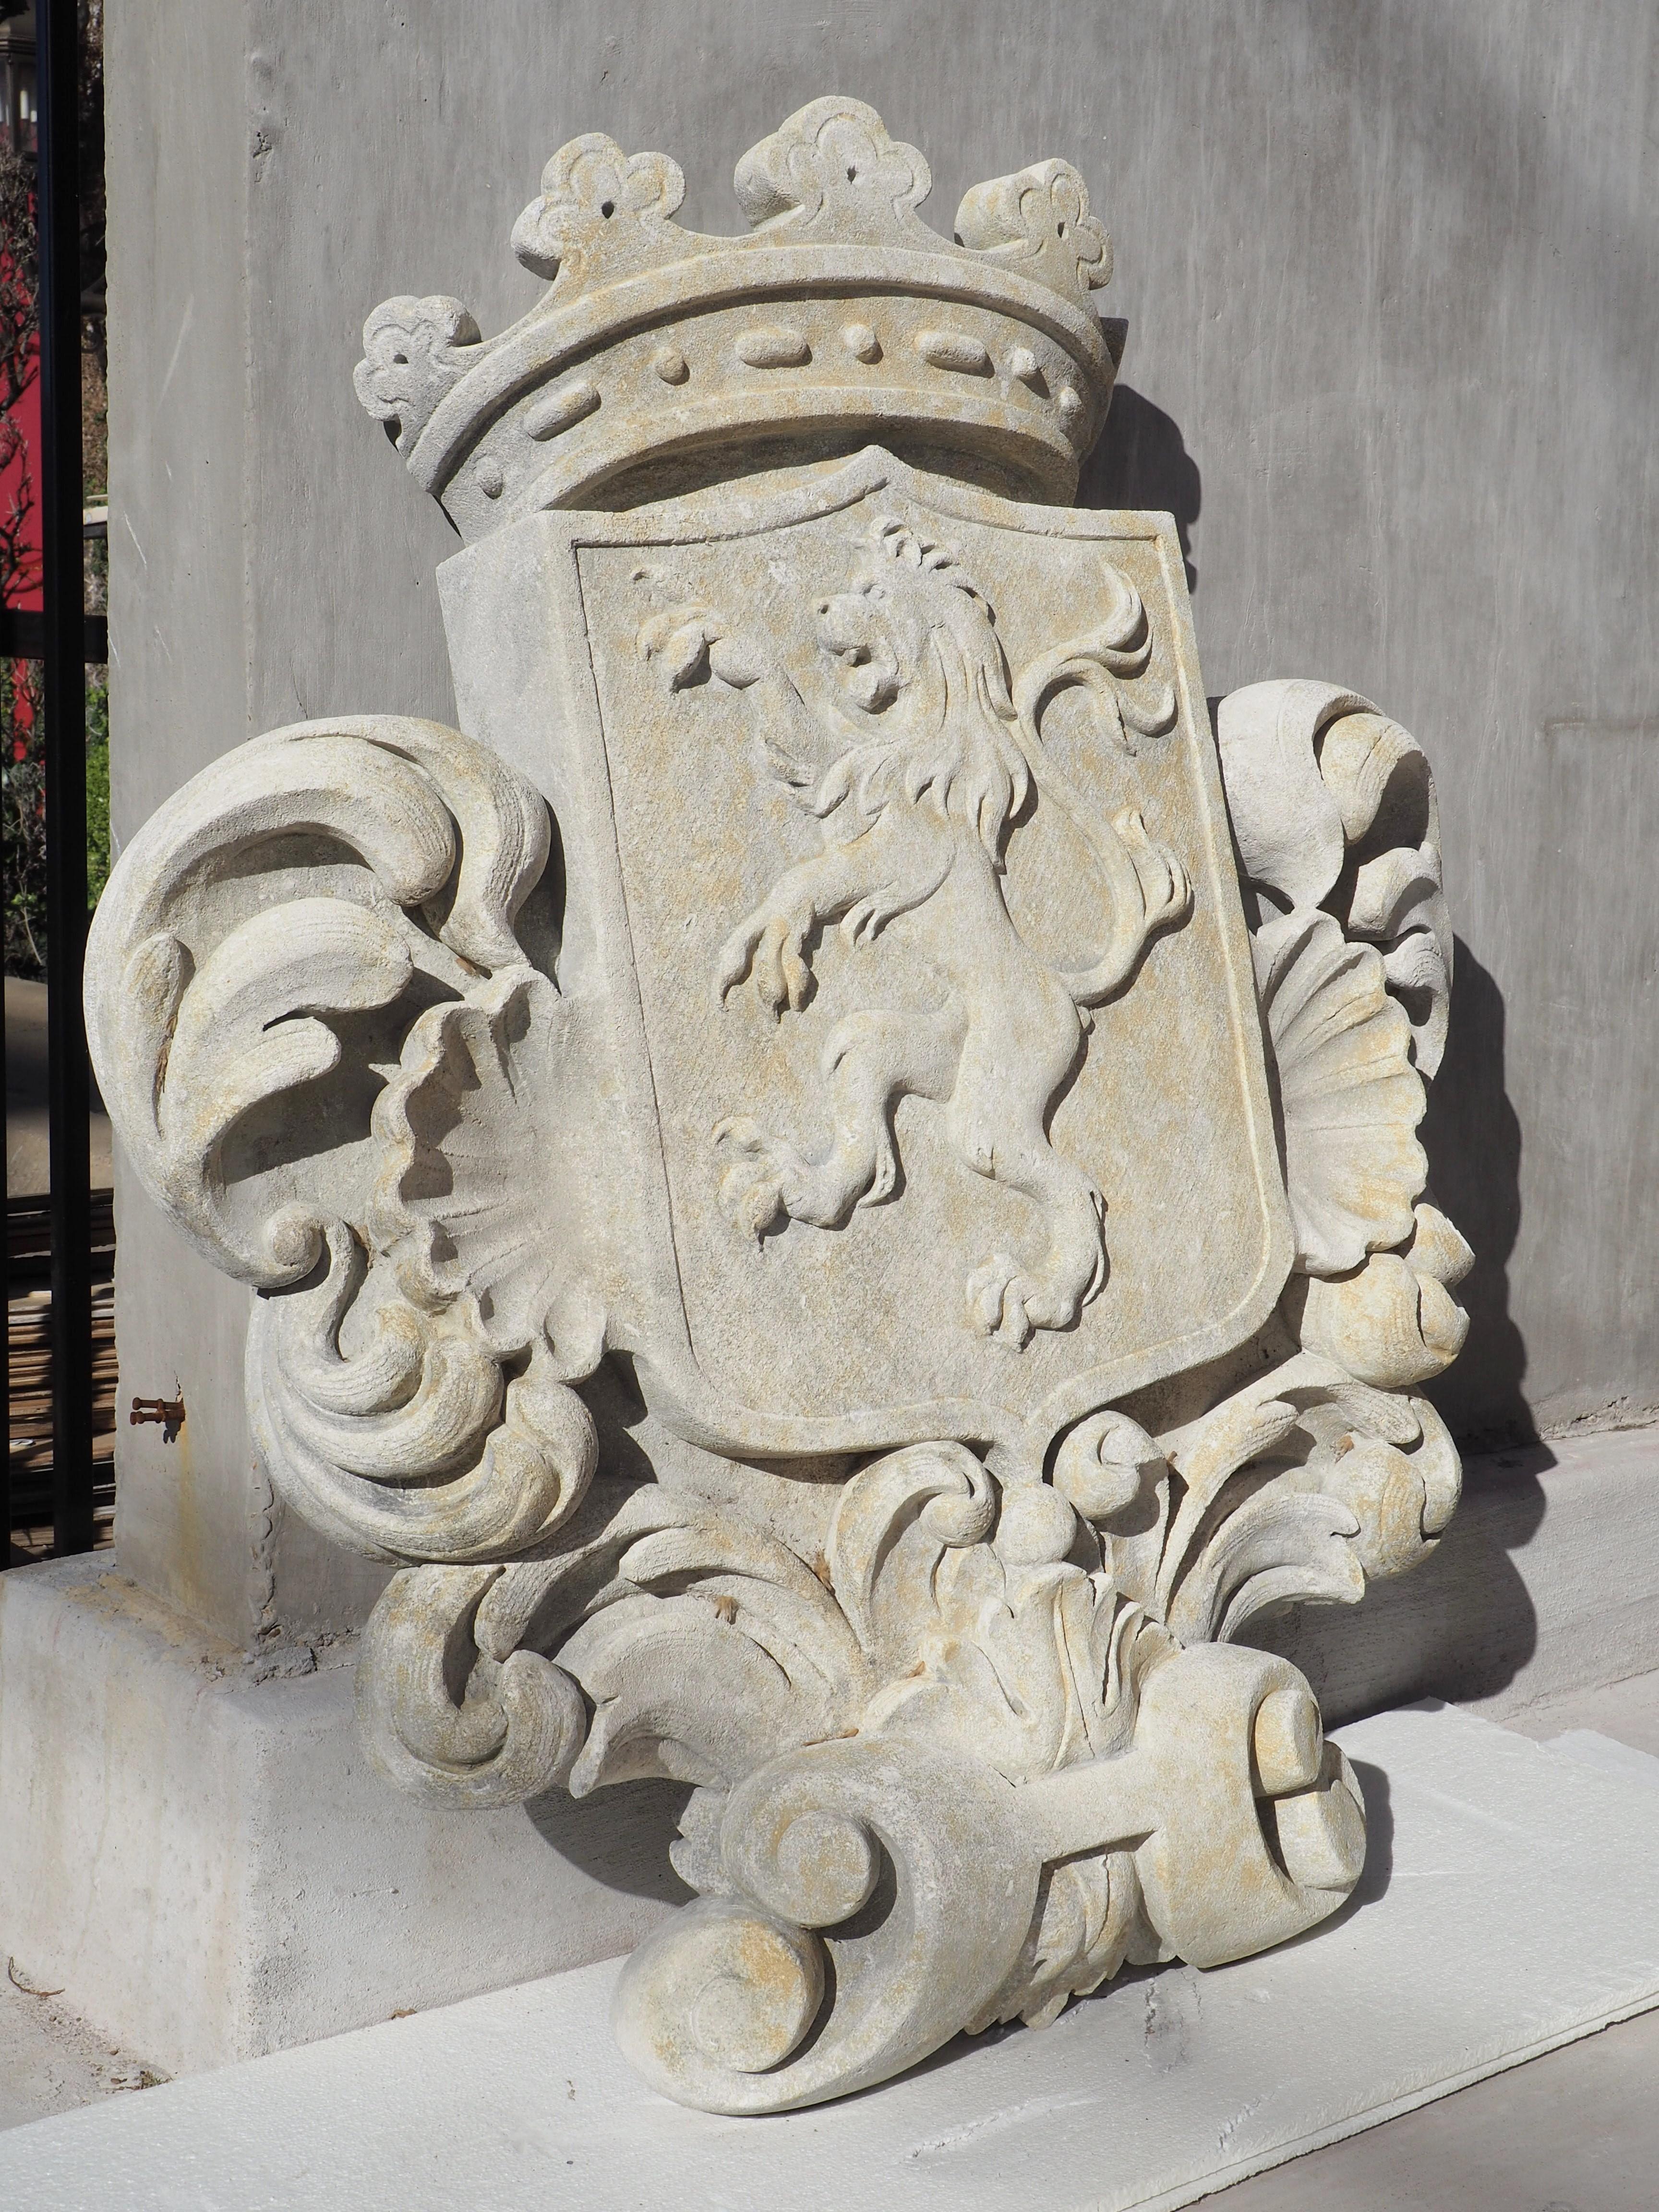 This large stemma plaque was hand-carved out of a solid block of limestone in Italy by a highly skilled artist. The coat of arms is based on a French style escutcheon, but with a nicked top. An open crown has been carved above the shield which